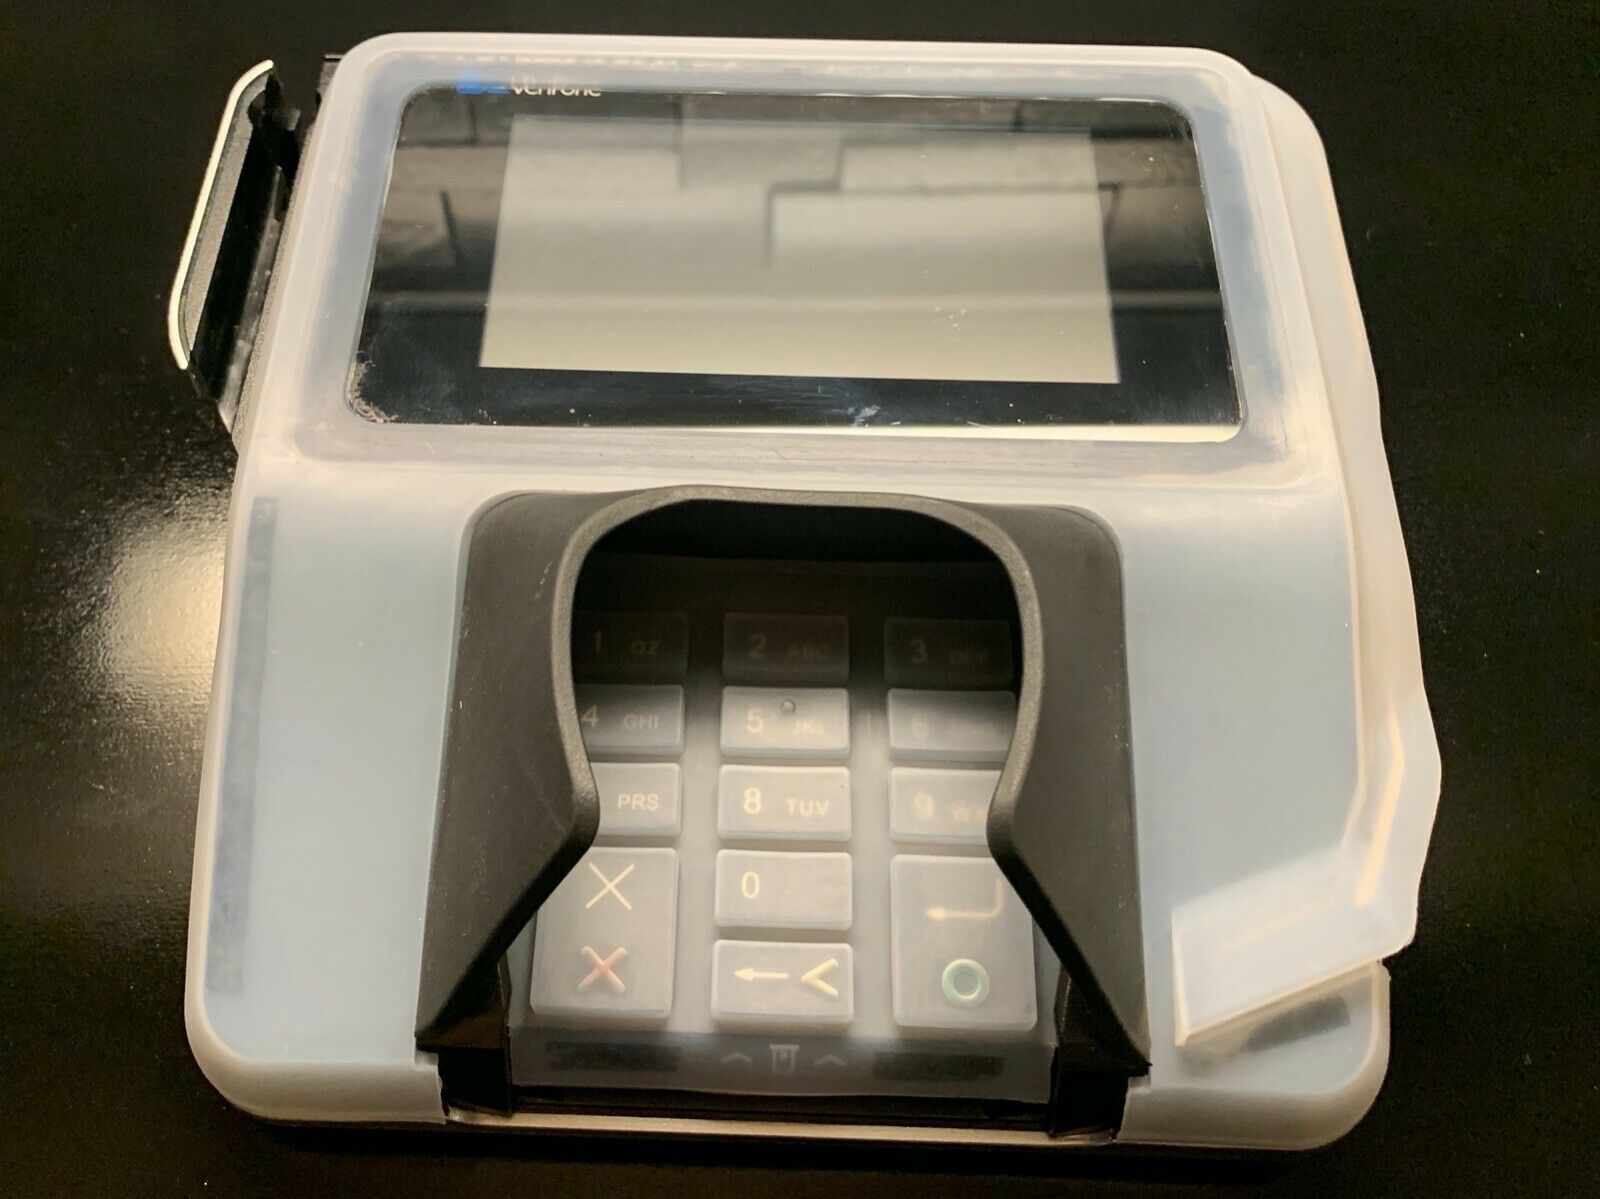 Verifone Mx915 Full Antimicrobial Cover W/ Tempered Glass Screen Protector